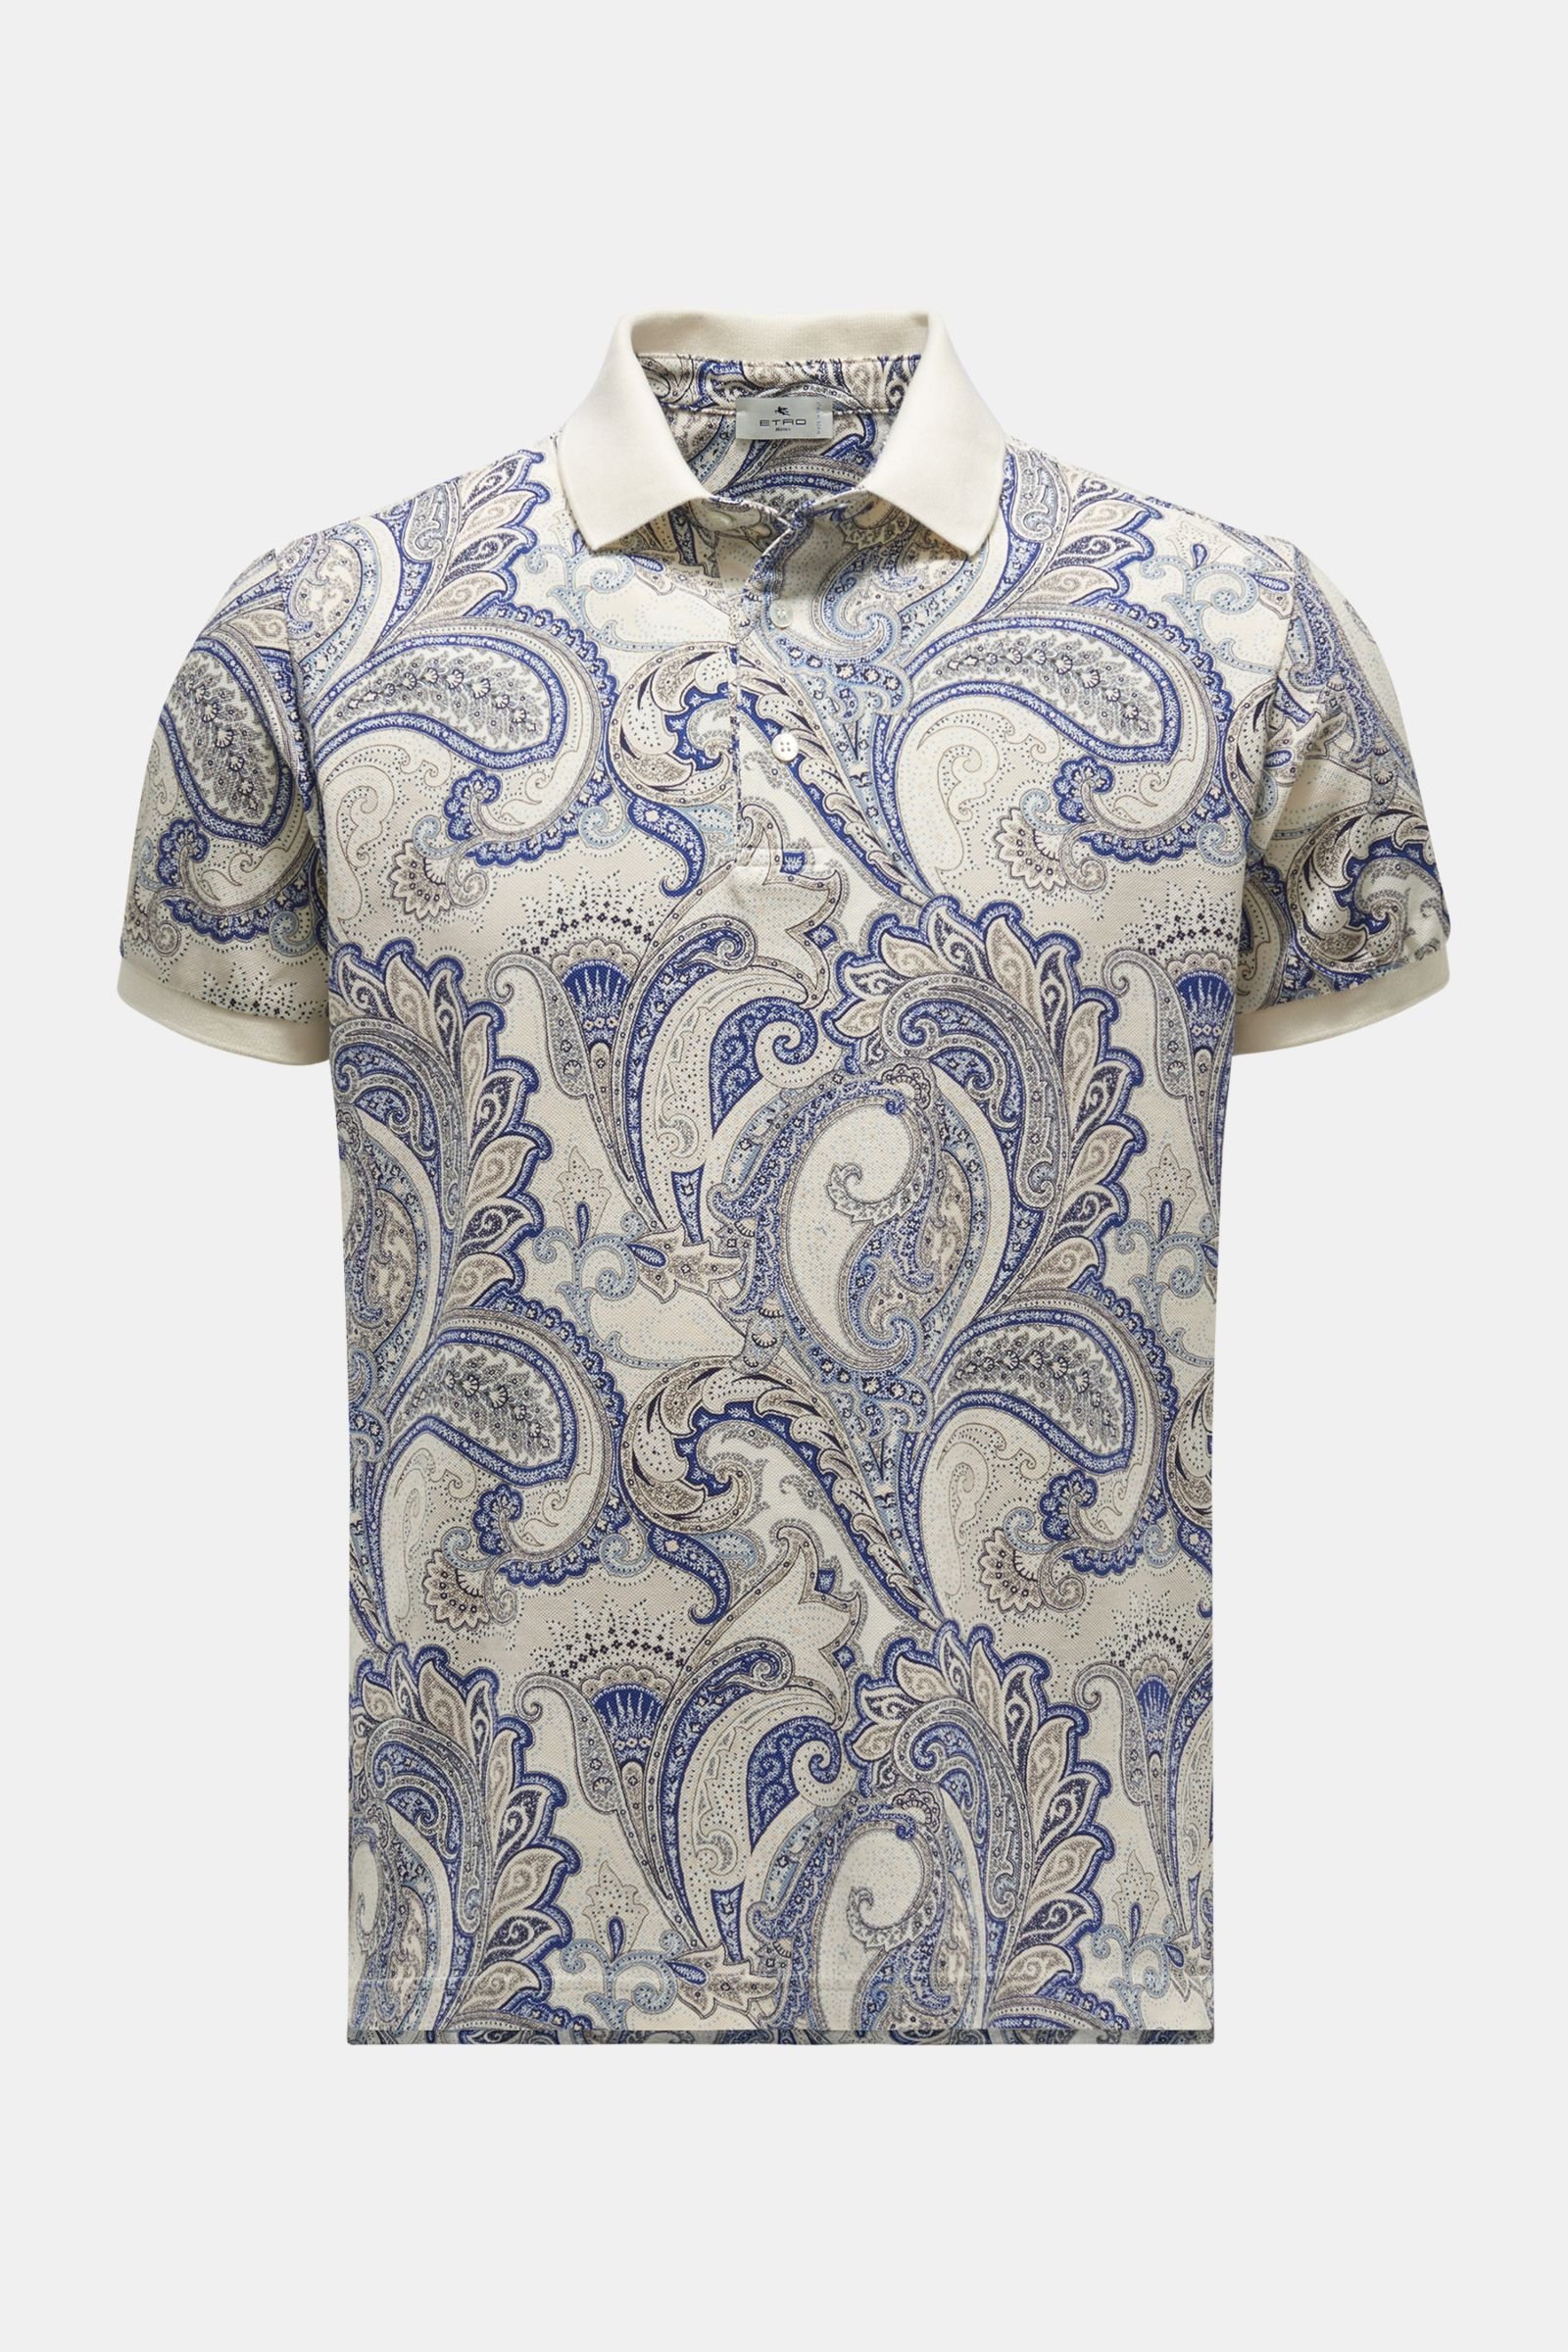 Polo shirt white/navy patterned